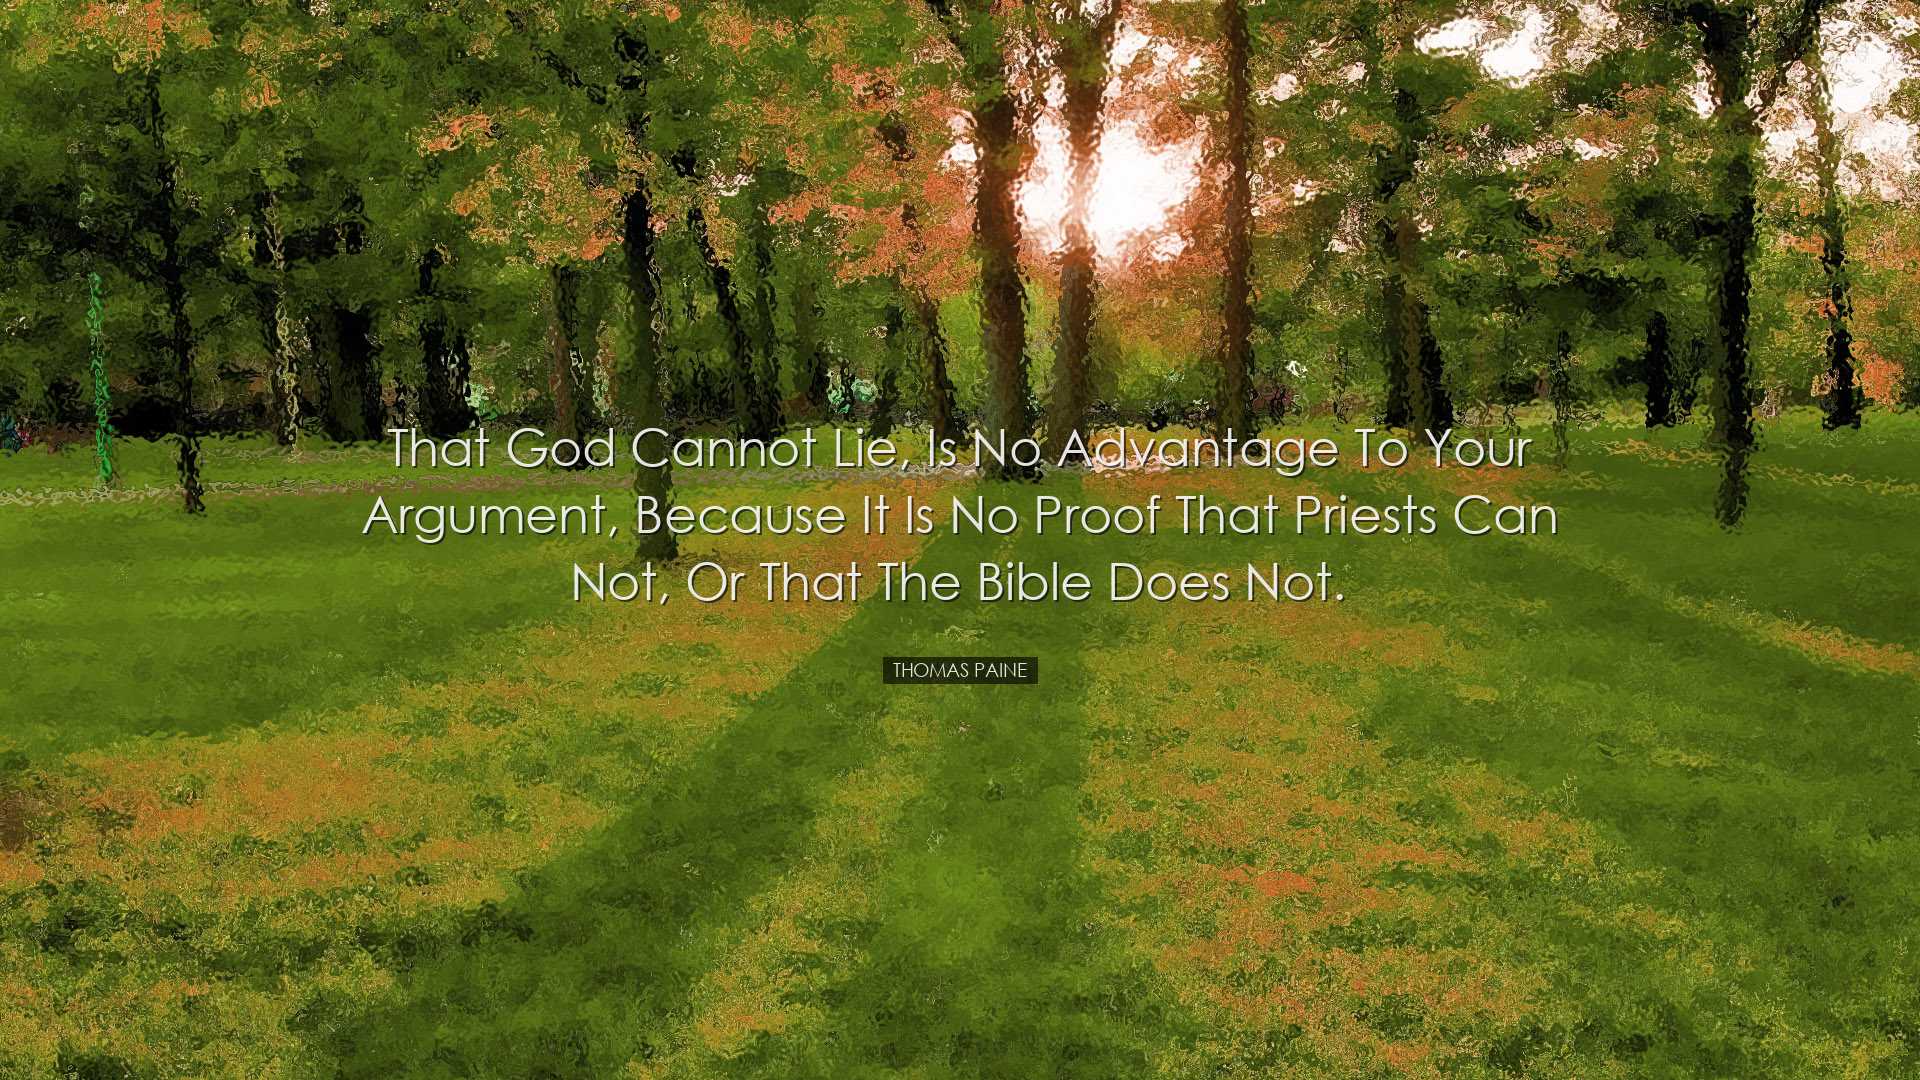 That God cannot lie, is no advantage to your argument, because it